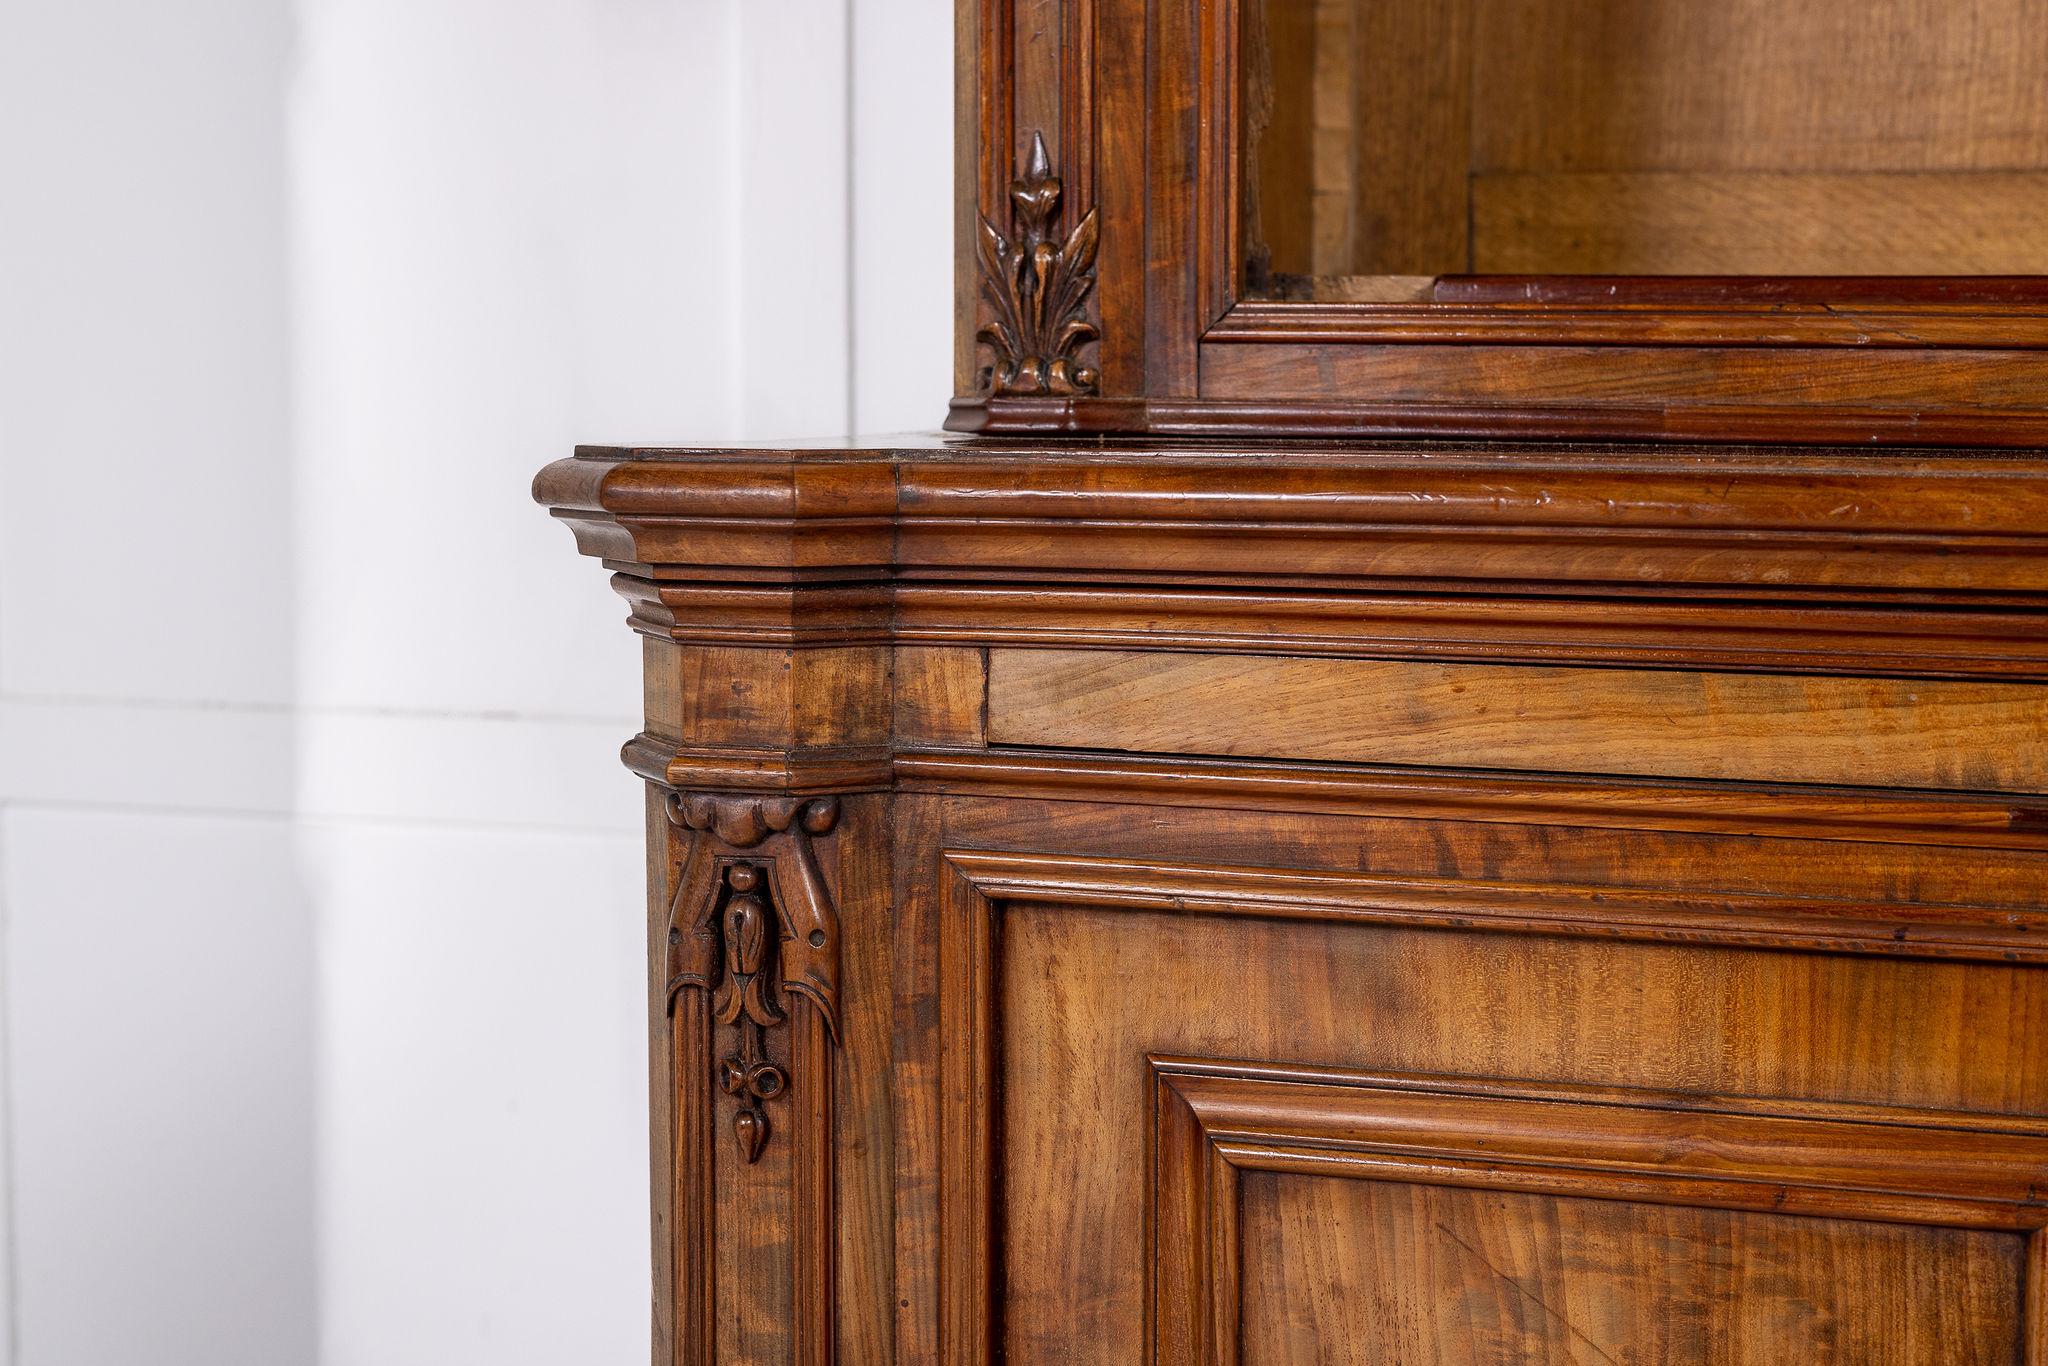 An Exceptional Quality Early 19th Century French Mahogany Bookcase with the Finest Possible Veneers and Wonderful Carving Throughout.

This superb bookcase features the best quality mahogany veneers laid on to an oak carcase with solid mahogany